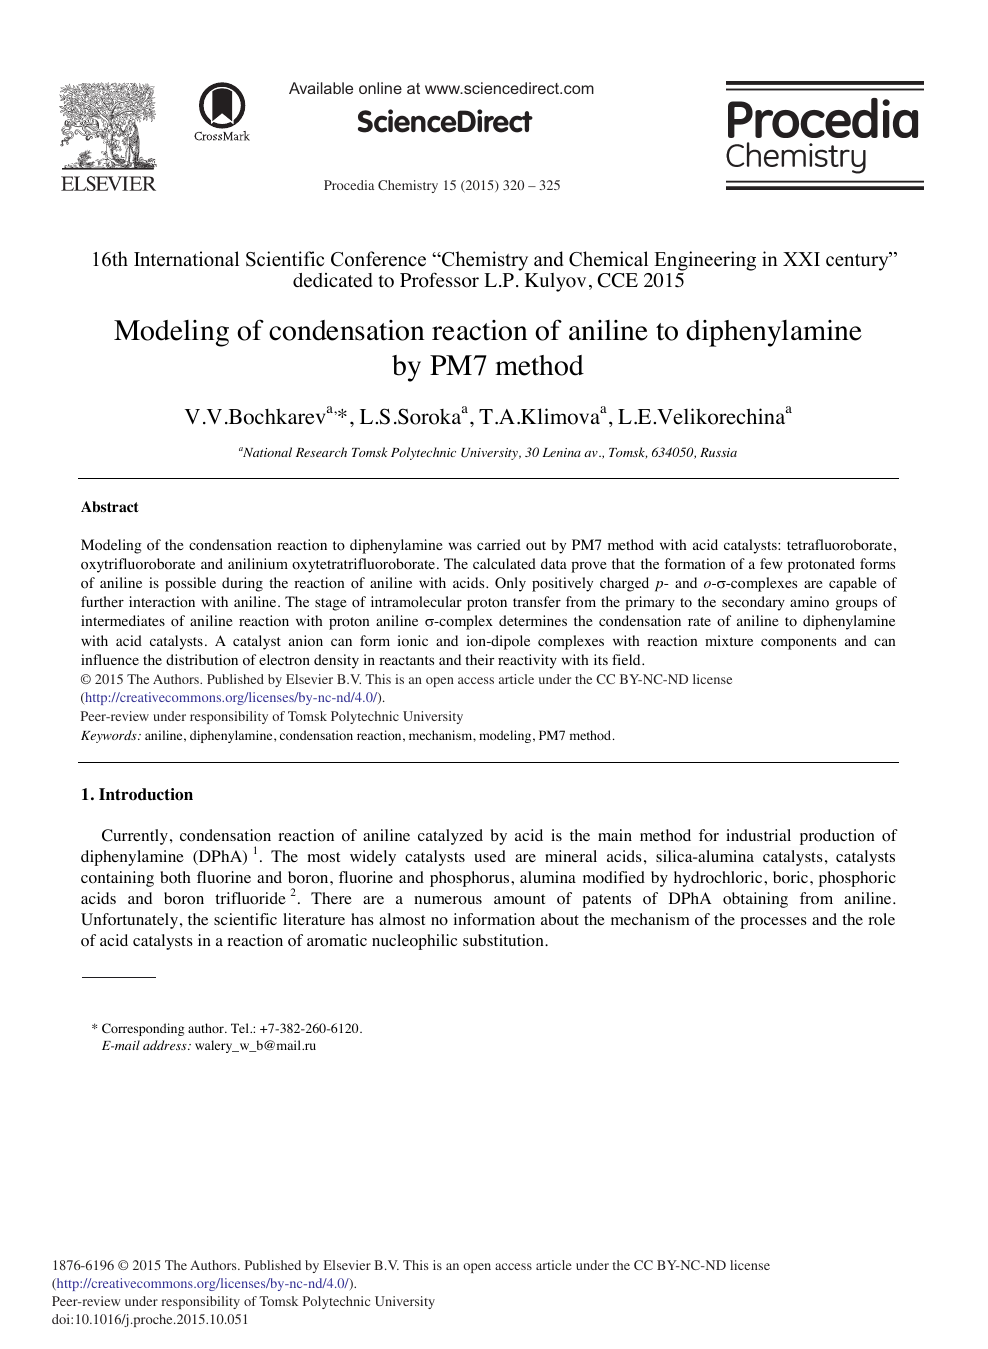 Modeling Of Condensation Reaction Of Aniline To Diphenylamine By Pm7 Method Topic Of Research Paper In Chemical Sciences Download Scholarly Article Pdf And Read For Free On Cyberleninka Open Science Hub